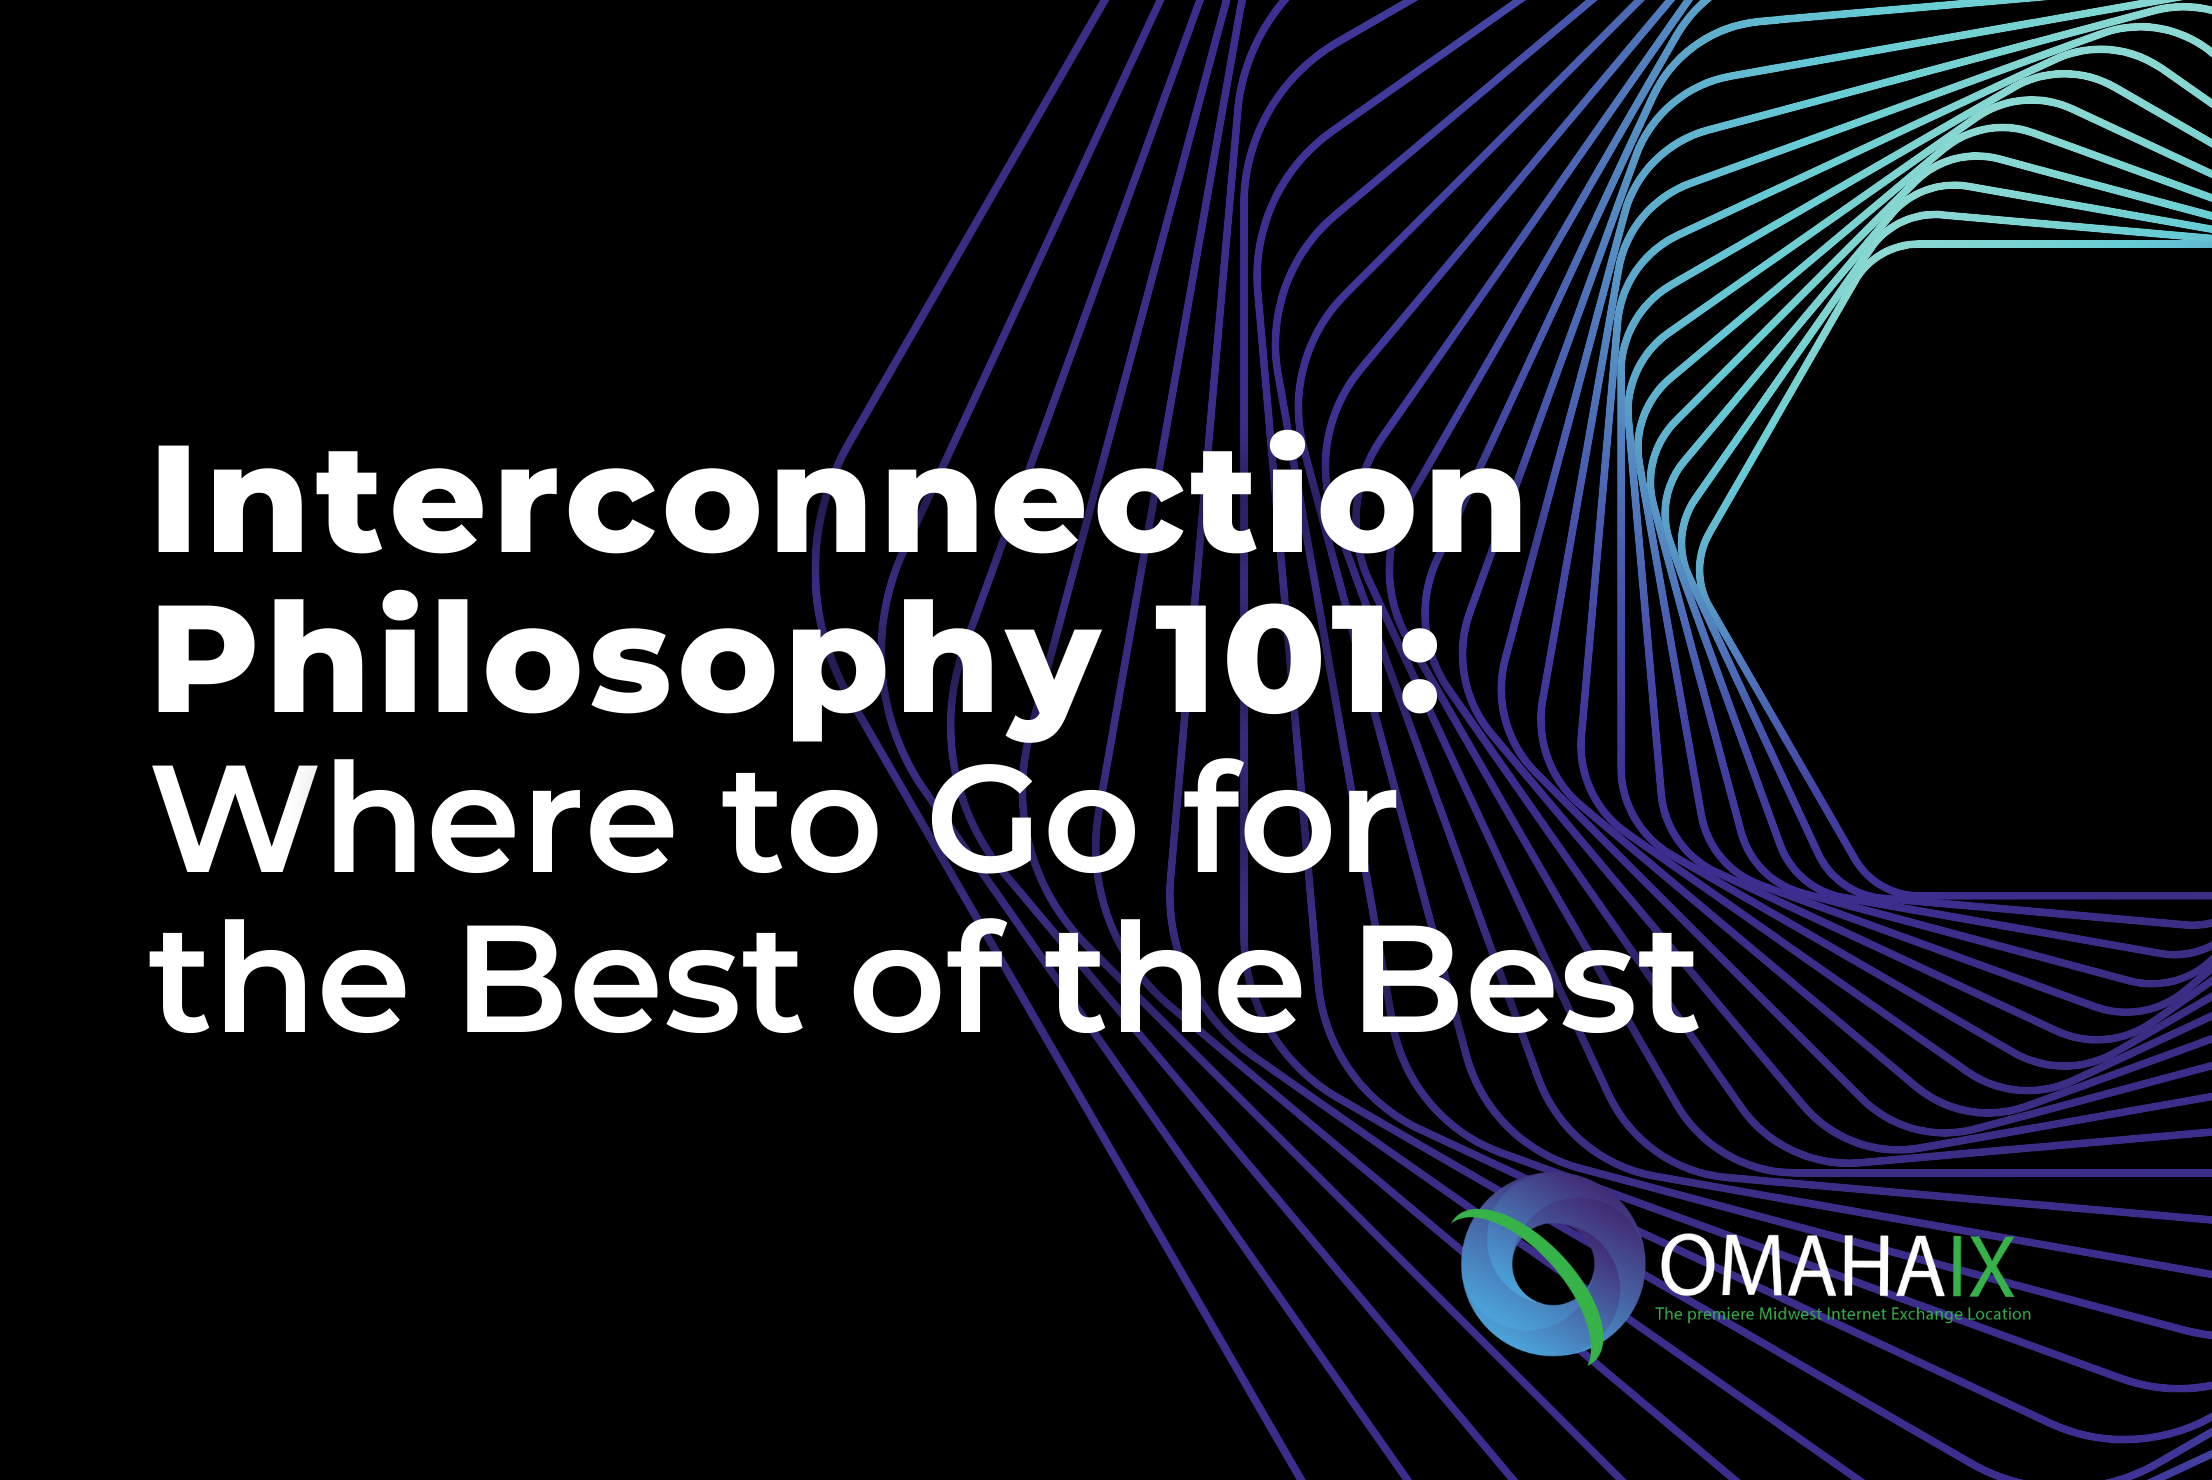 Interconnection Philosophy 101 Where to Go for the Best of the Best of an IX